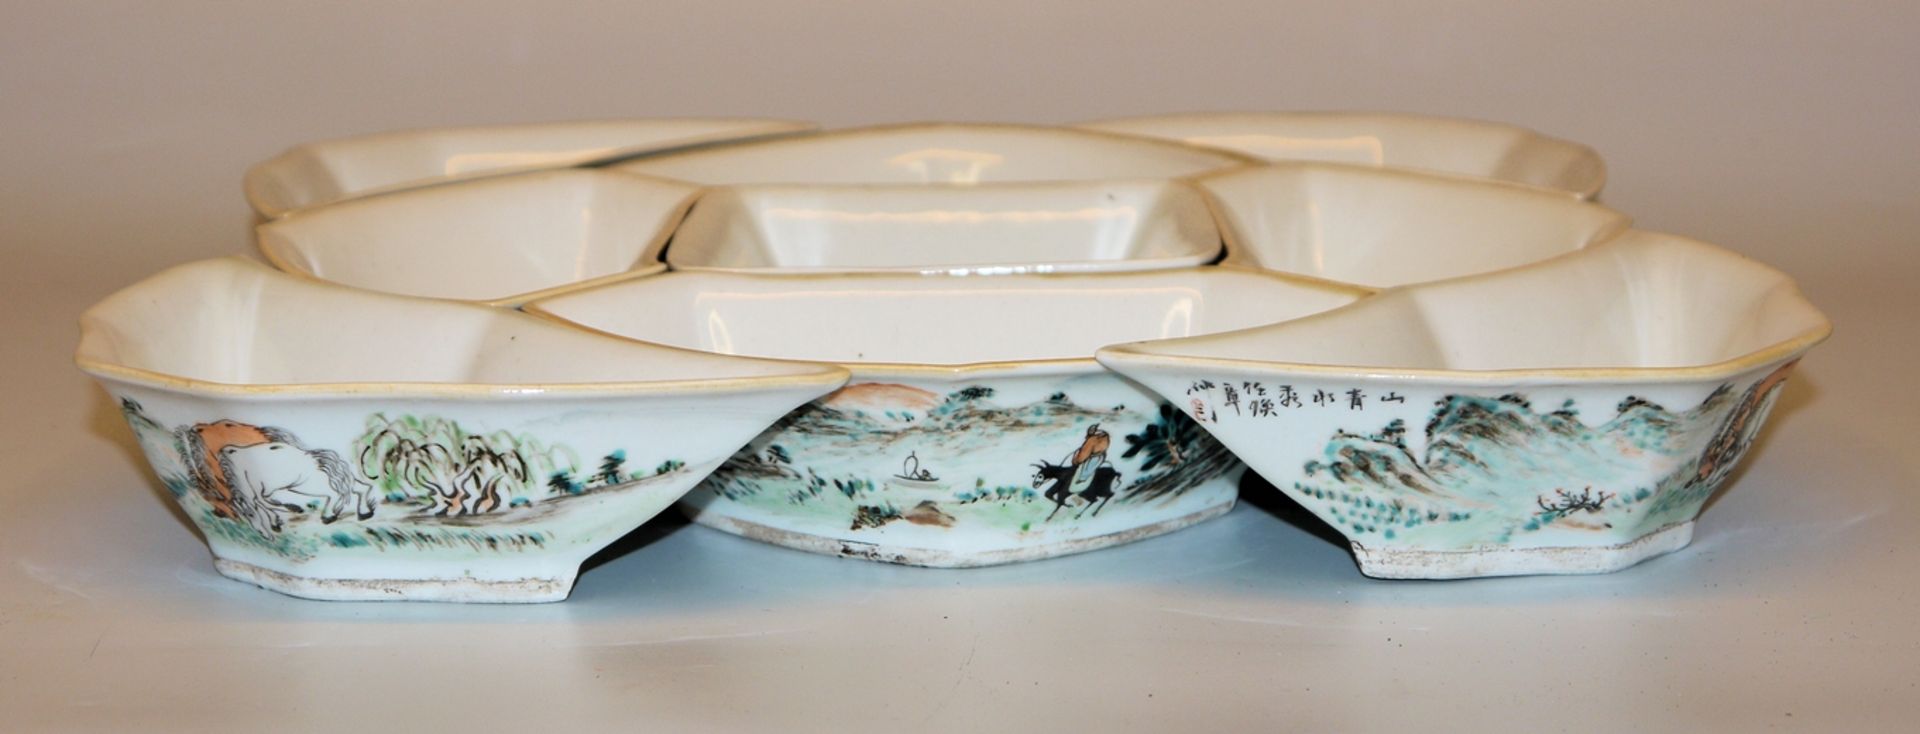 9-piece porcelain cabaret from the Republic period, China 1st half of the 20th century